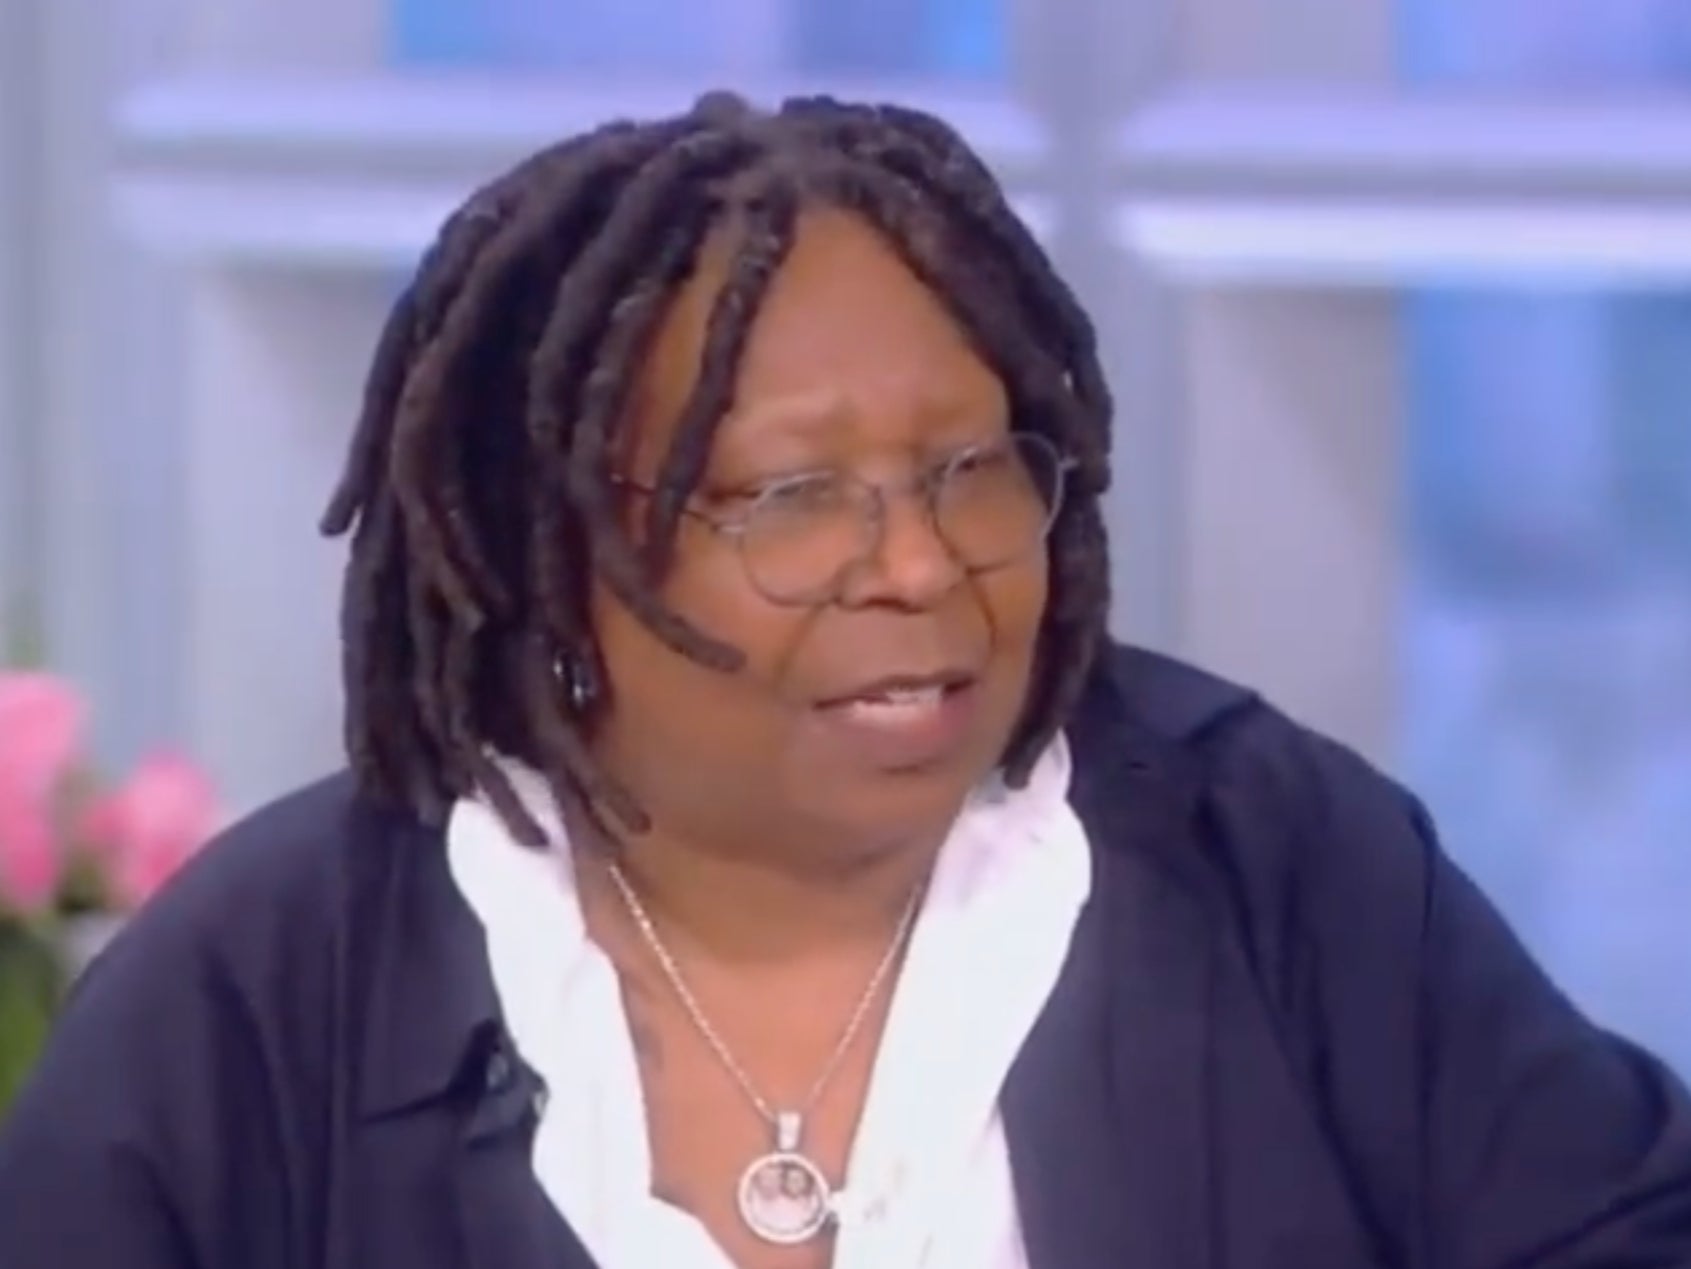 Whoopi Goldberg issued a second apology for her ‘dangerous’ Holocaust comments on ‘The View’